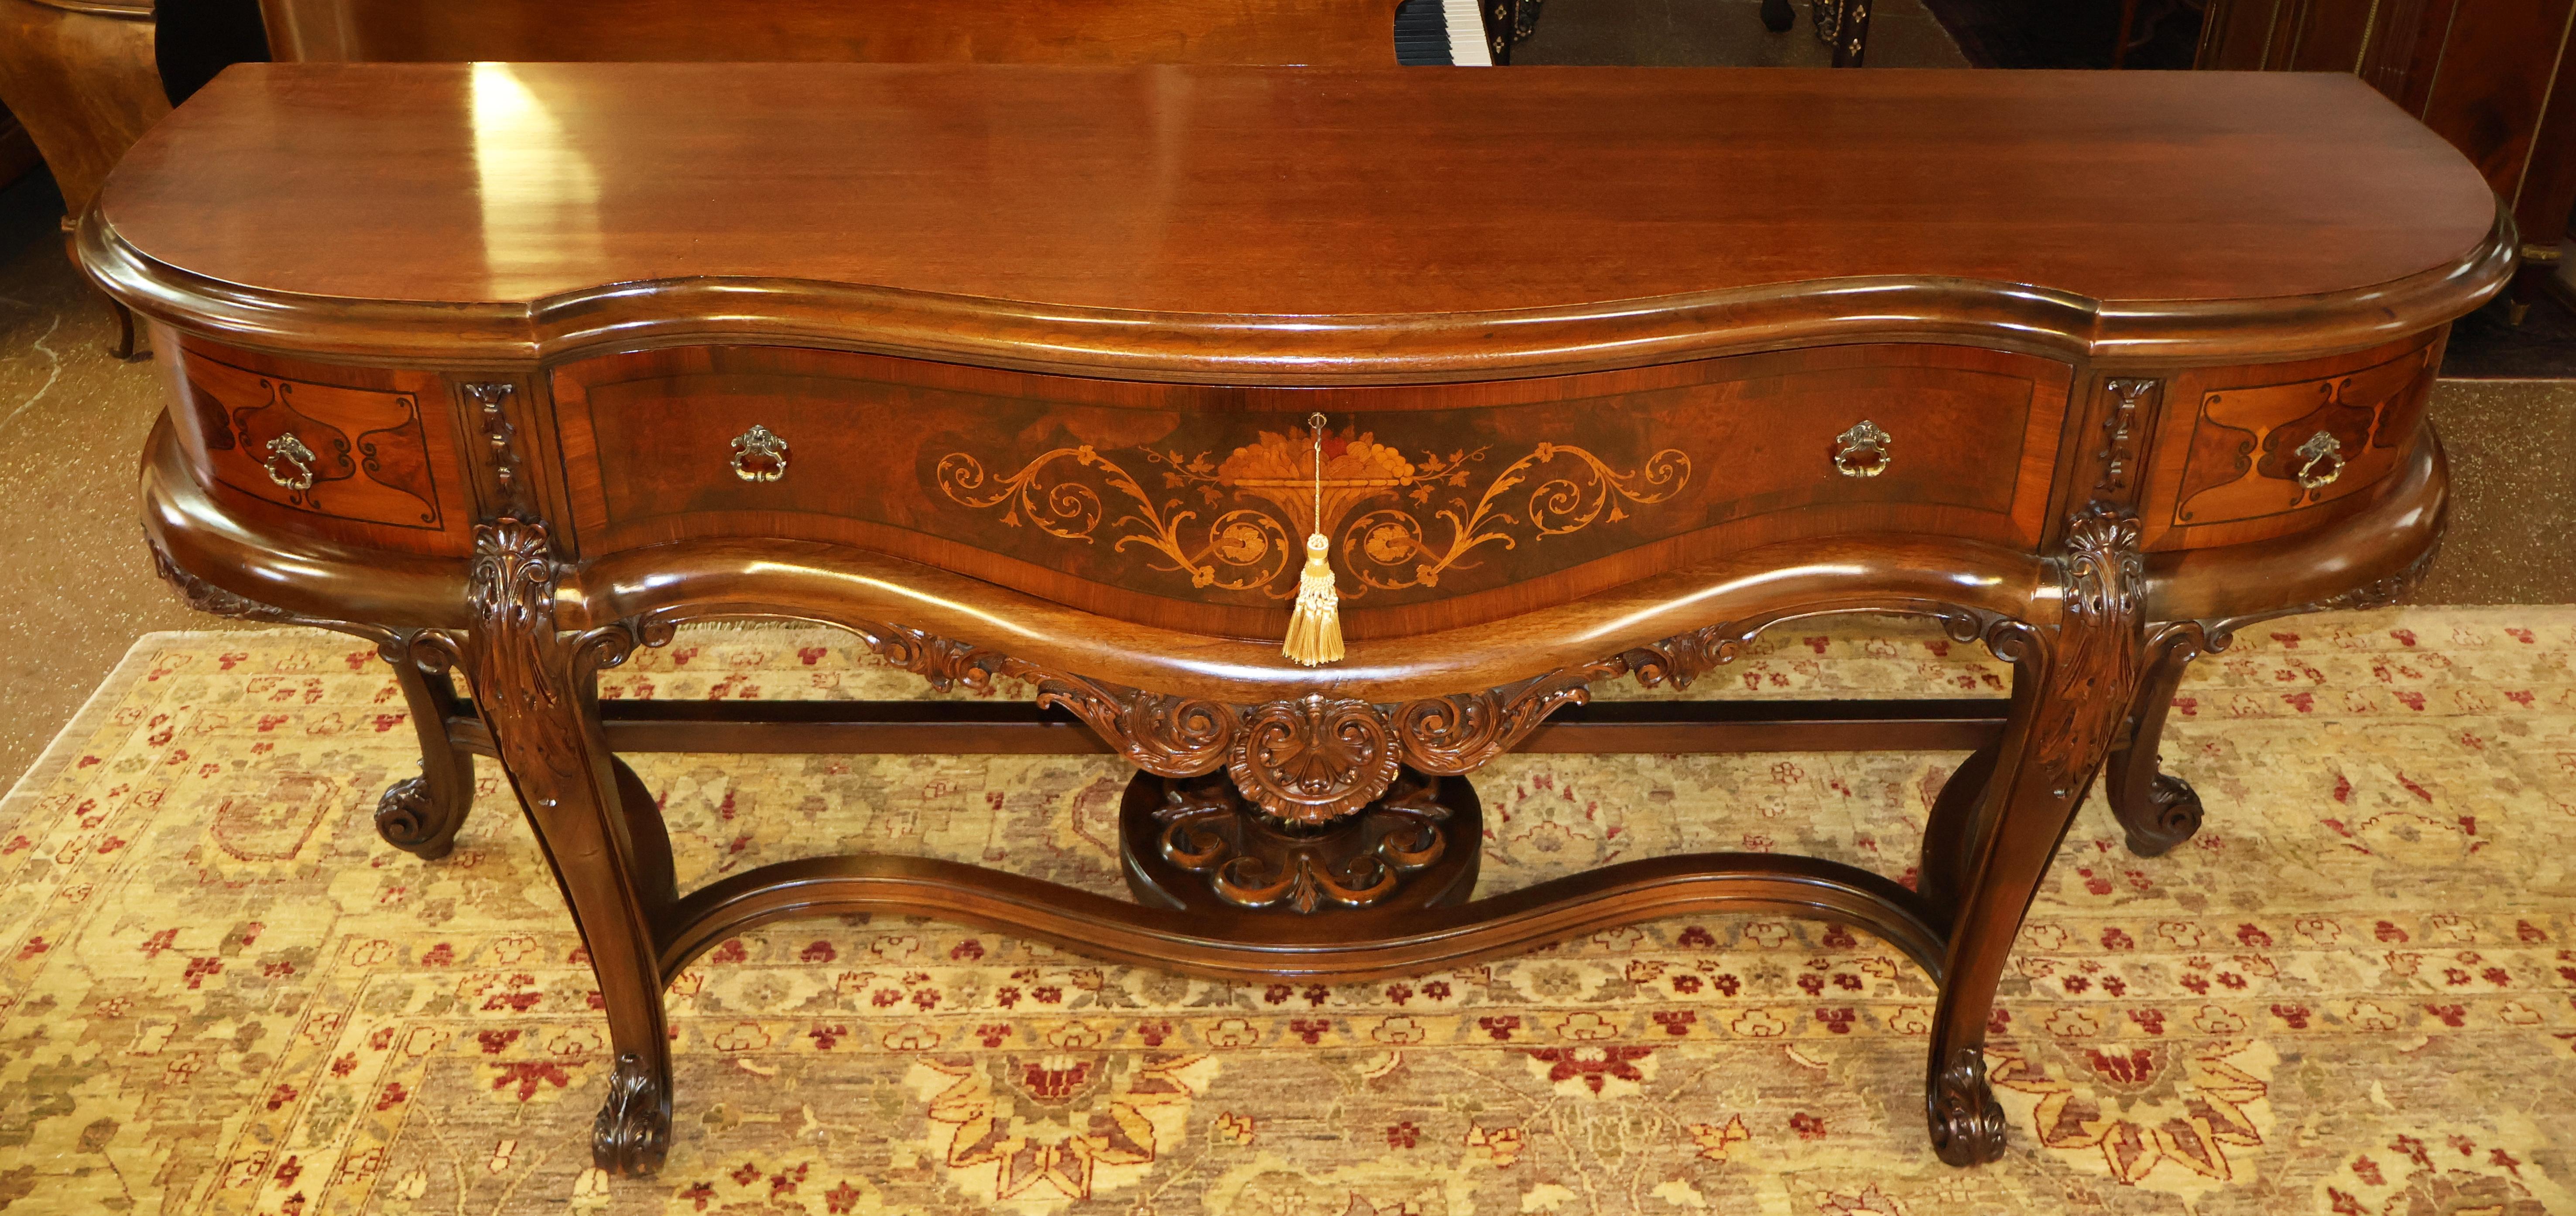 ​1920's Walnut Inlaid French Style Server Buffet Sideboard By Rockford Furniture

Dimensions : 84